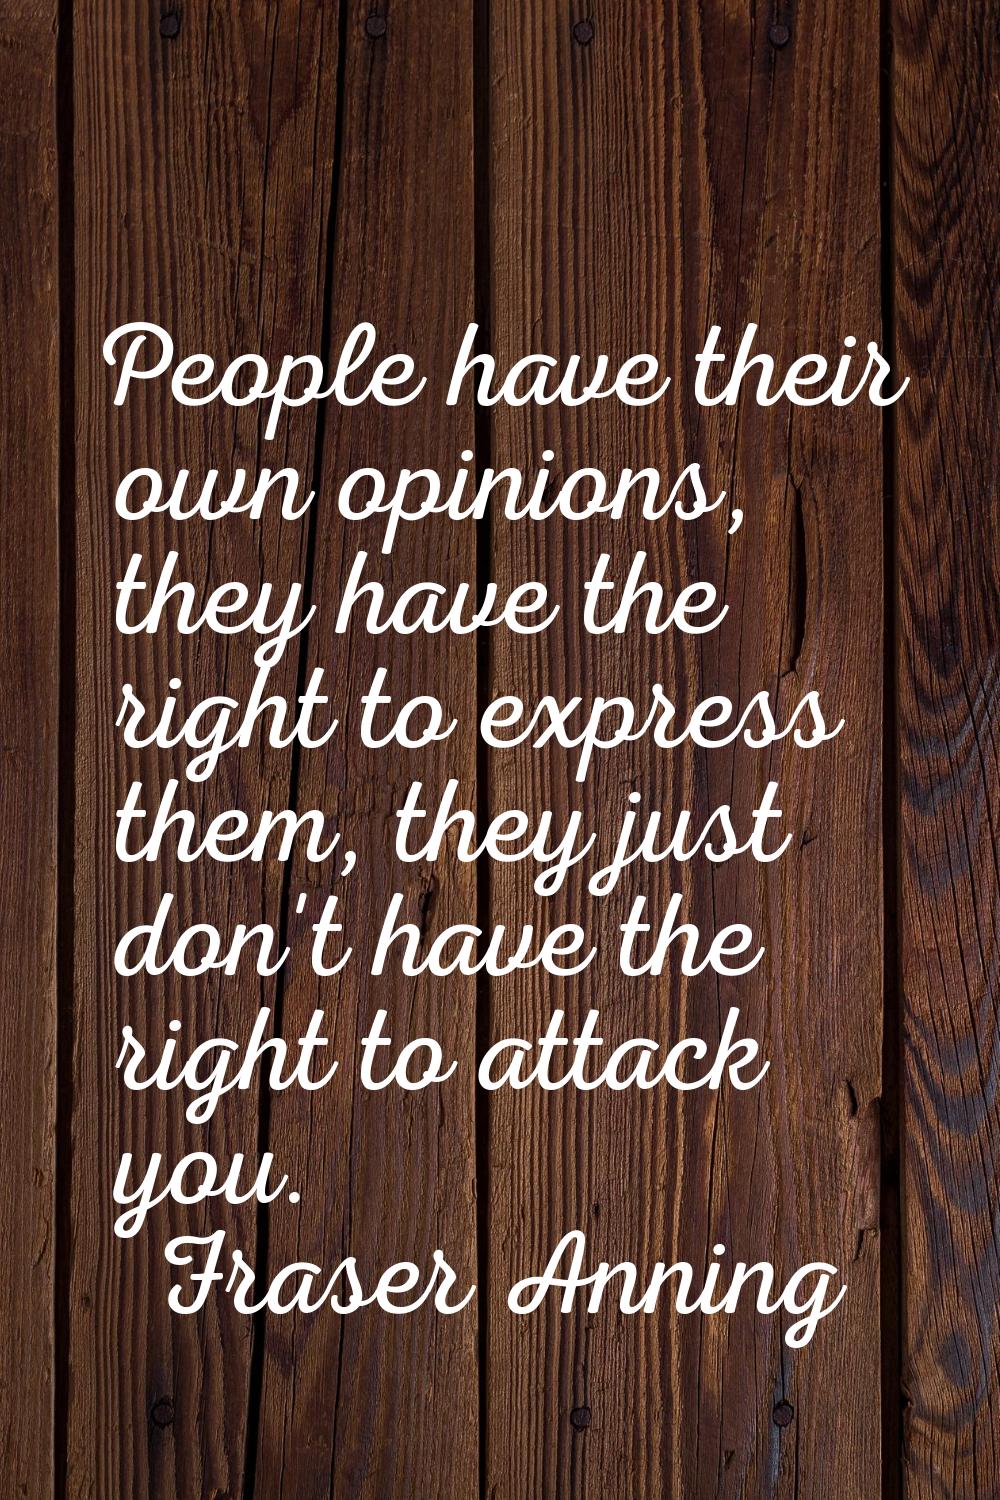 People have their own opinions, they have the right to express them, they just don't have the right